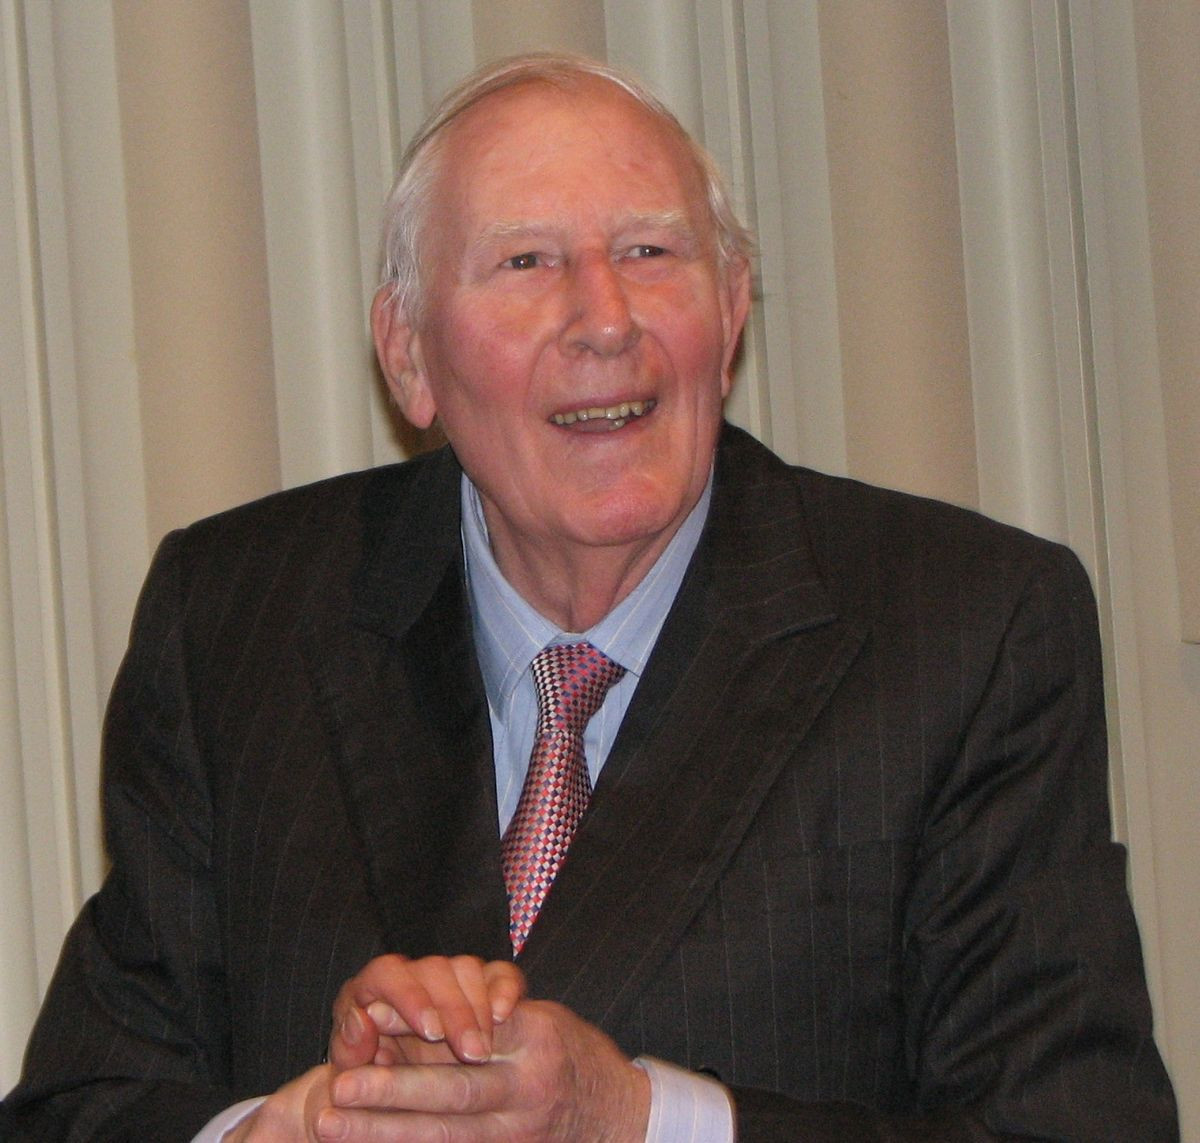 Sir Roger Bannister dies at age of 88